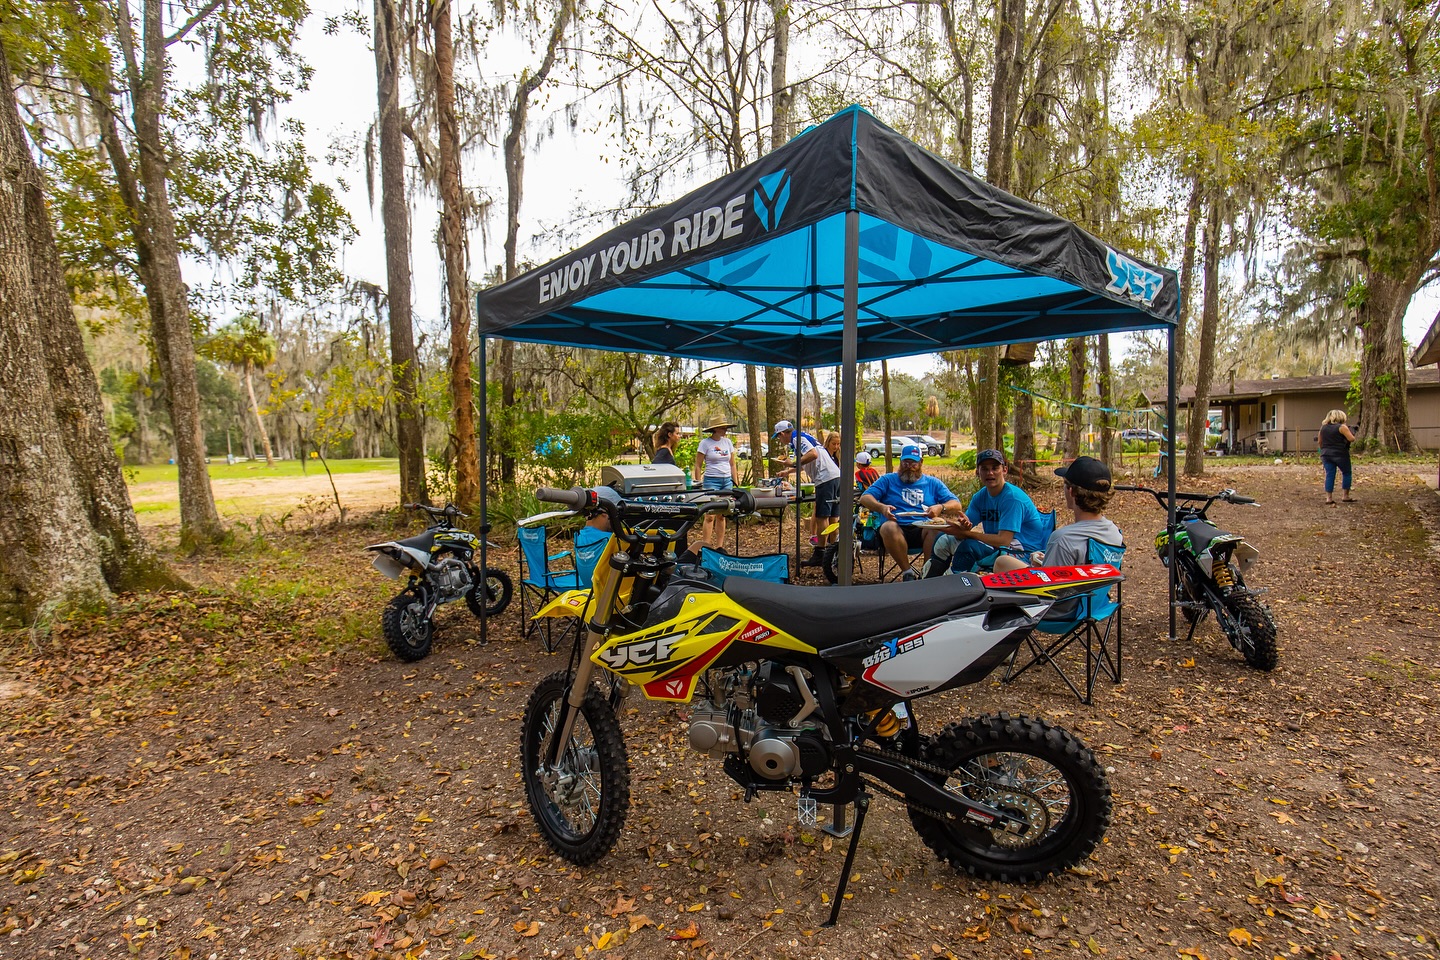 FRIDAY 🙌
Rev up for the weekend with YCF USA! 🏍️💨 Unleash the power and share your YCF adventures with us. May the sound of engines and adrenaline accompany you! 🏁✊
—
#ycf #moto #motocross #motorcycle